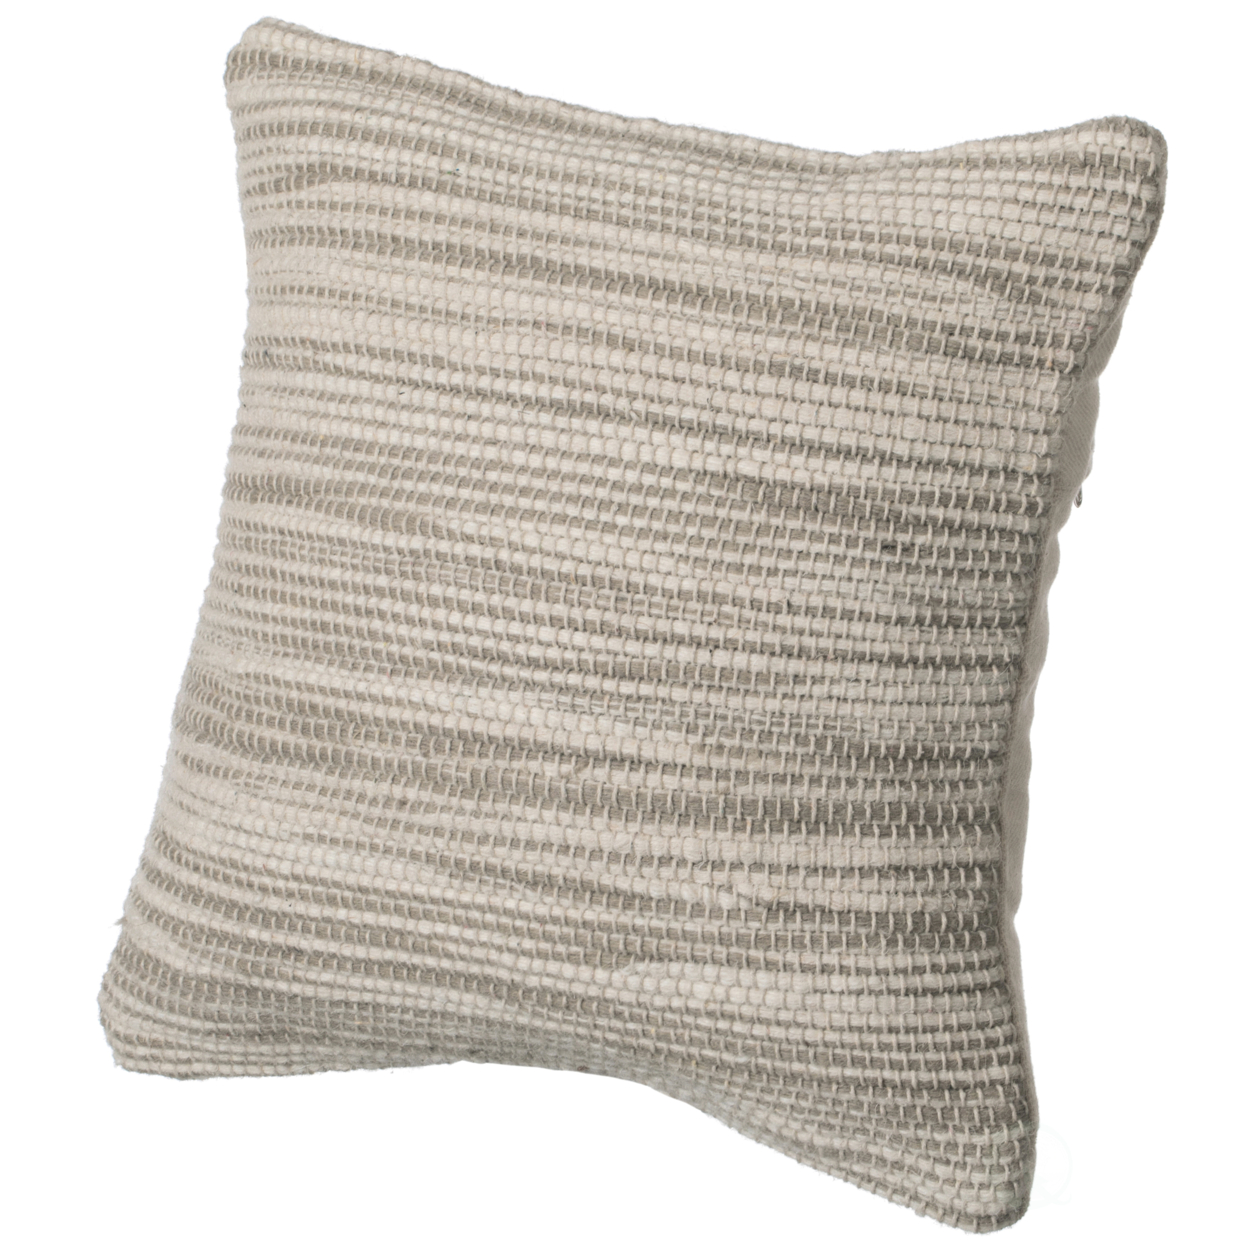 16 Handwoven Wool & Cotton Throw Pillow Cover With Woven Knit Texture - Rust With Cushion